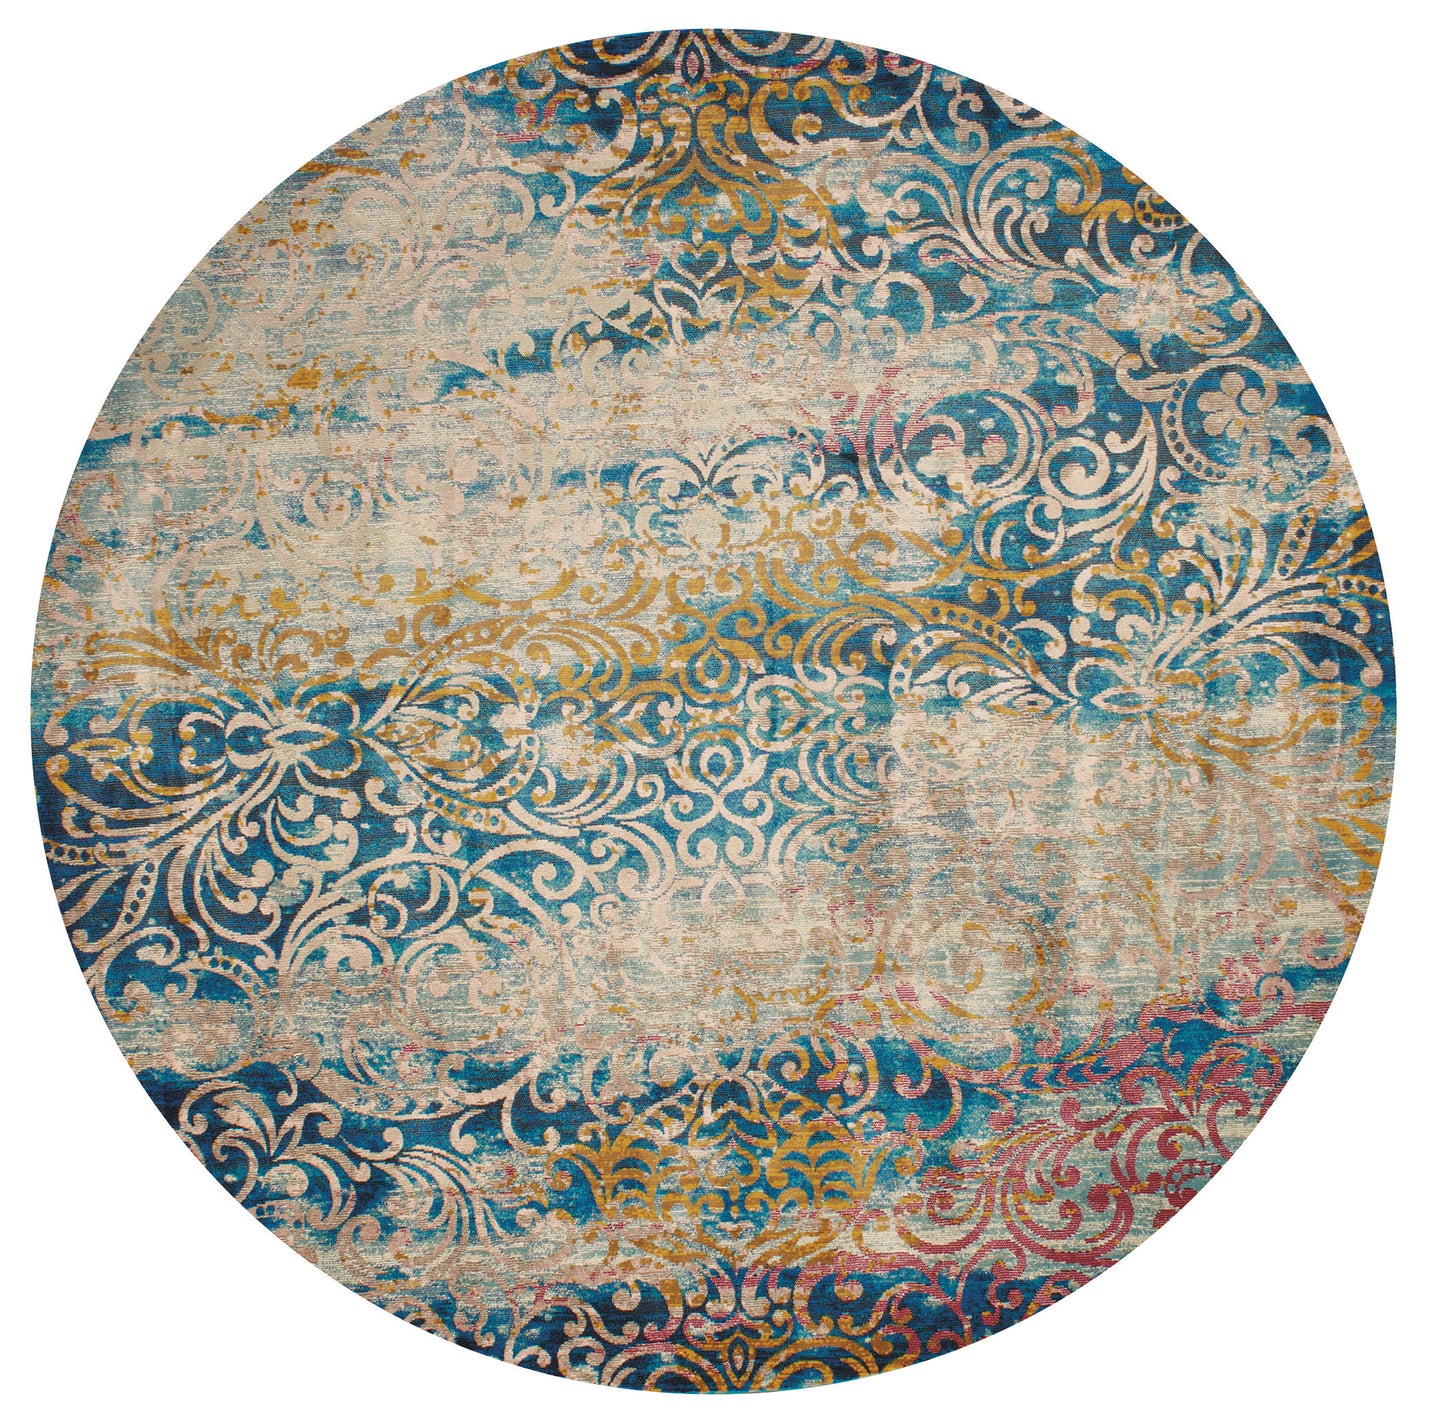 1830-Midlothian Synthetic Blend Indoor Area Rug by United Weavers